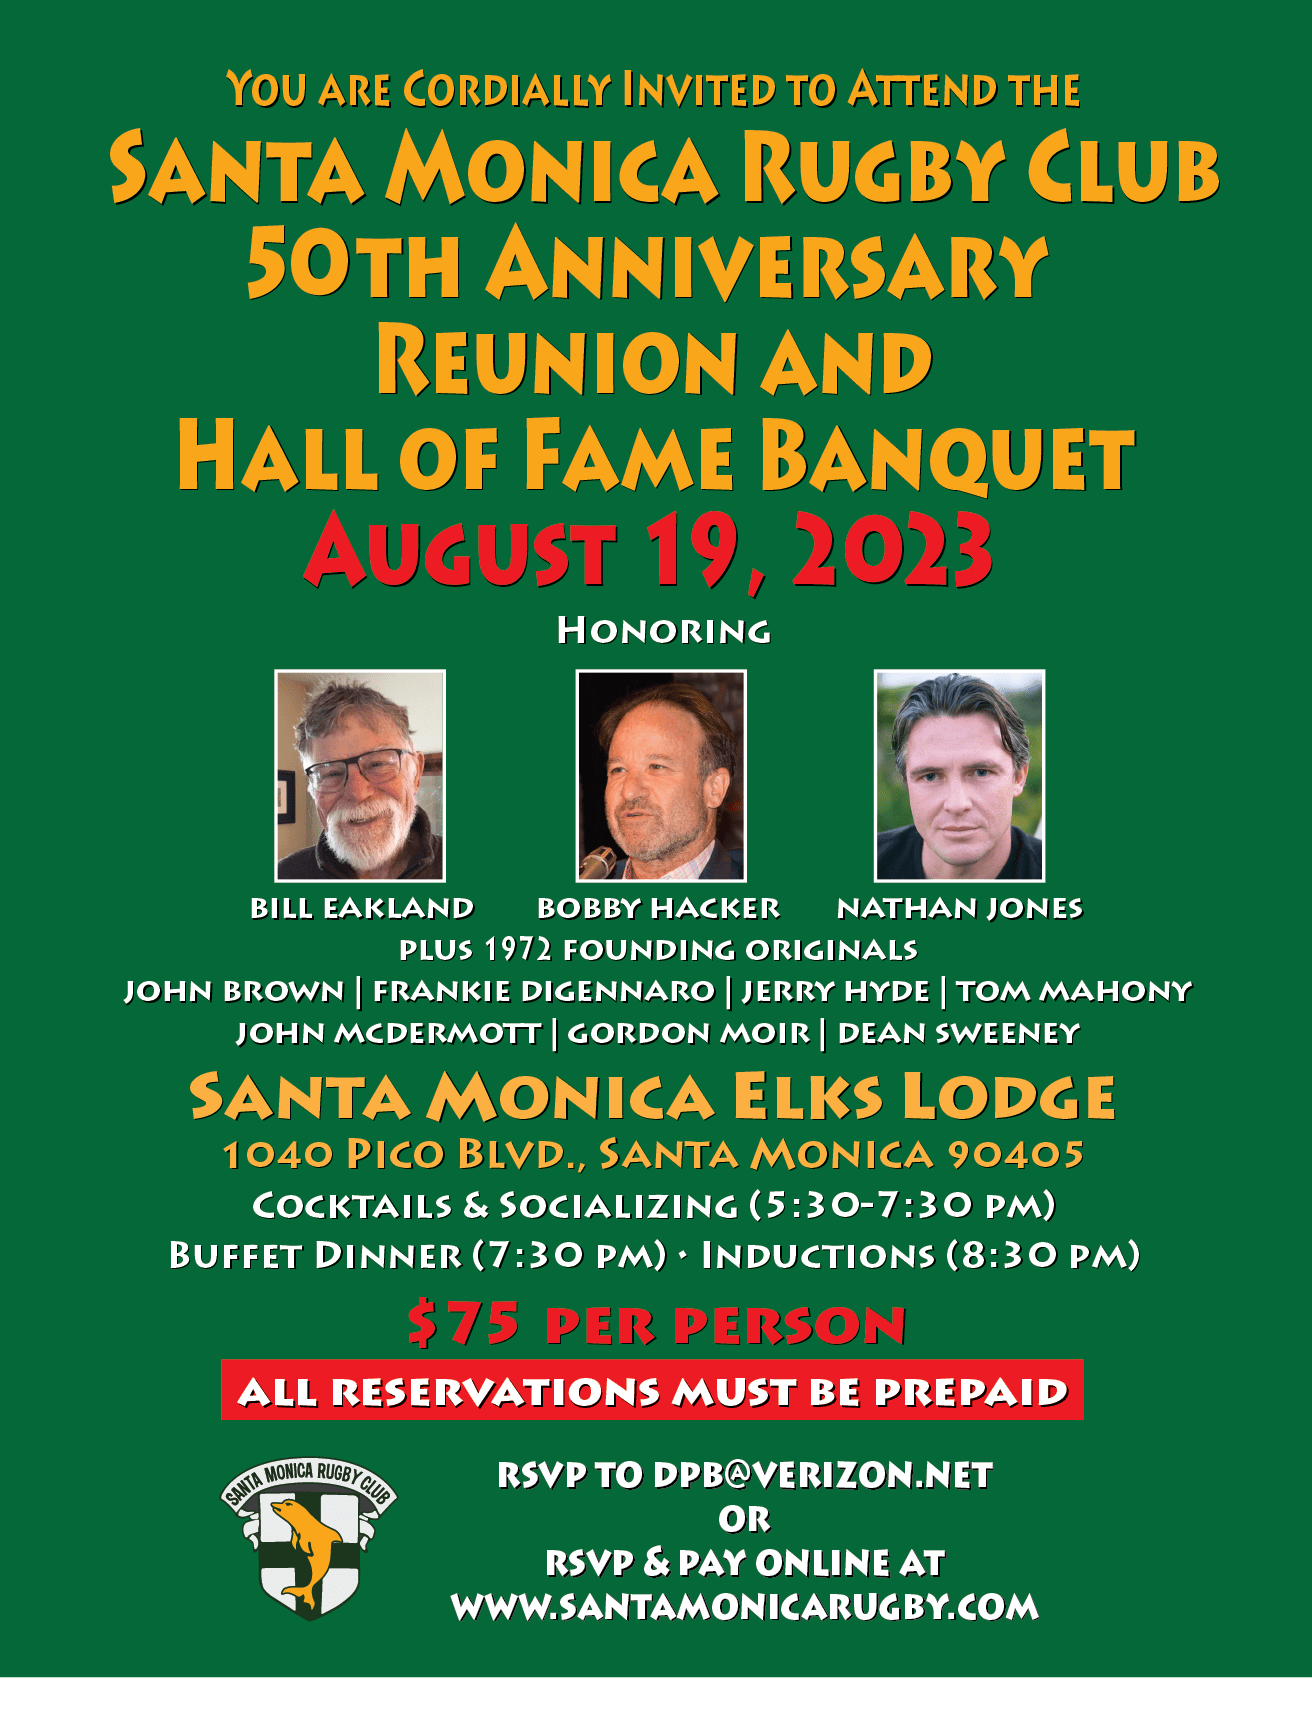 Santa Monica Rugby Club Hall of Fame